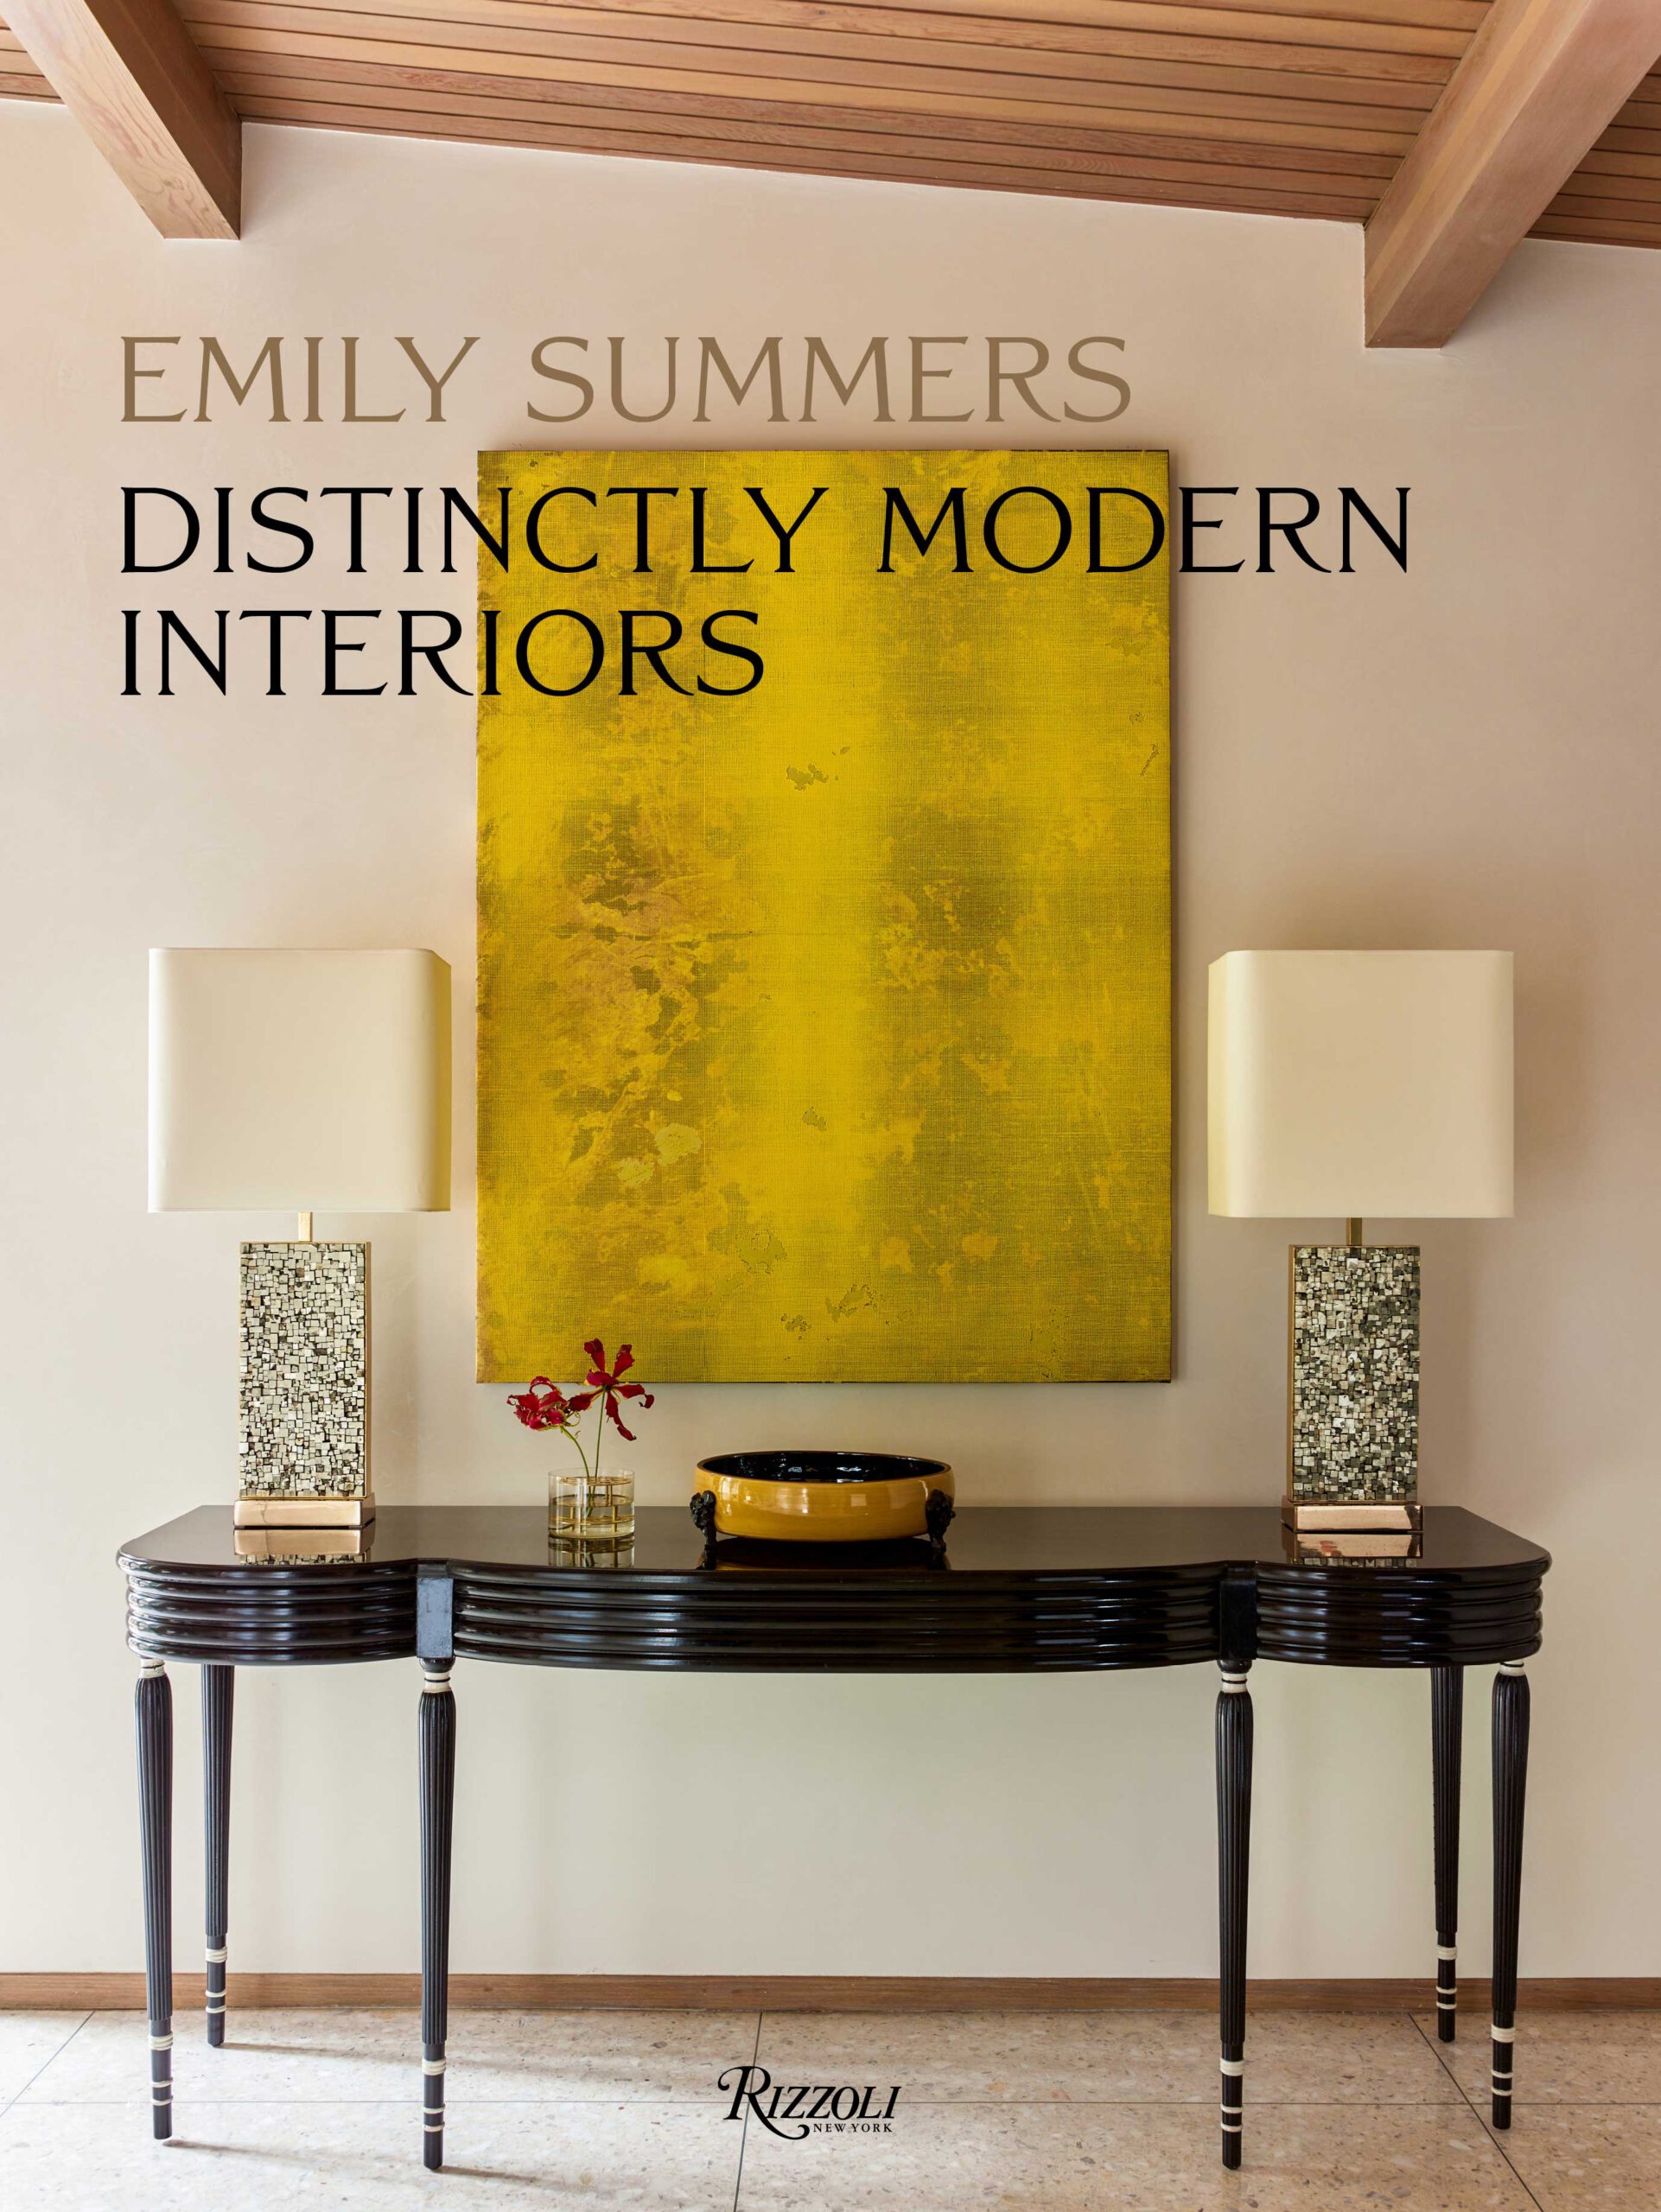 Distinctly Modern Interiors book cover